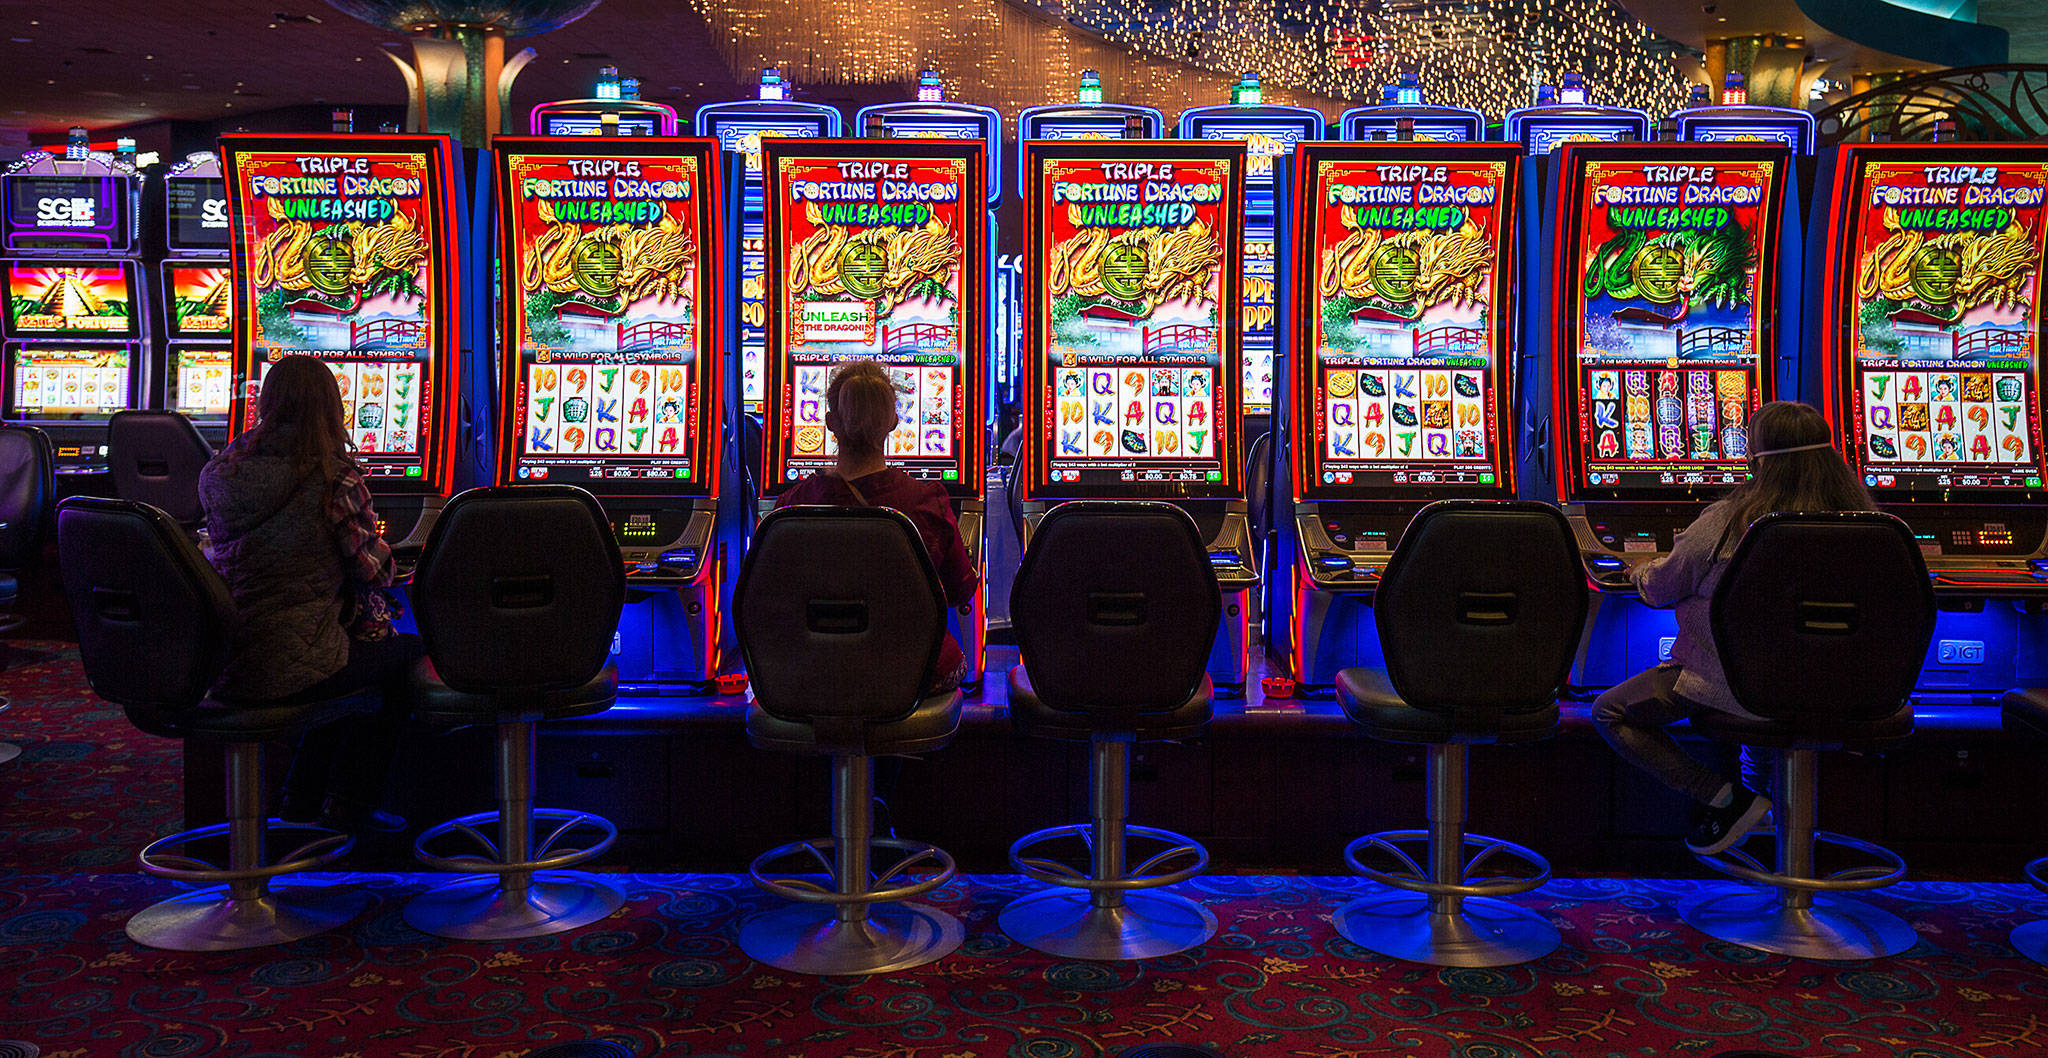 Slot machine players keep their distance Tuesday as the Tulalip Resort Casino reopens. (Andy Bronson / The Herald)